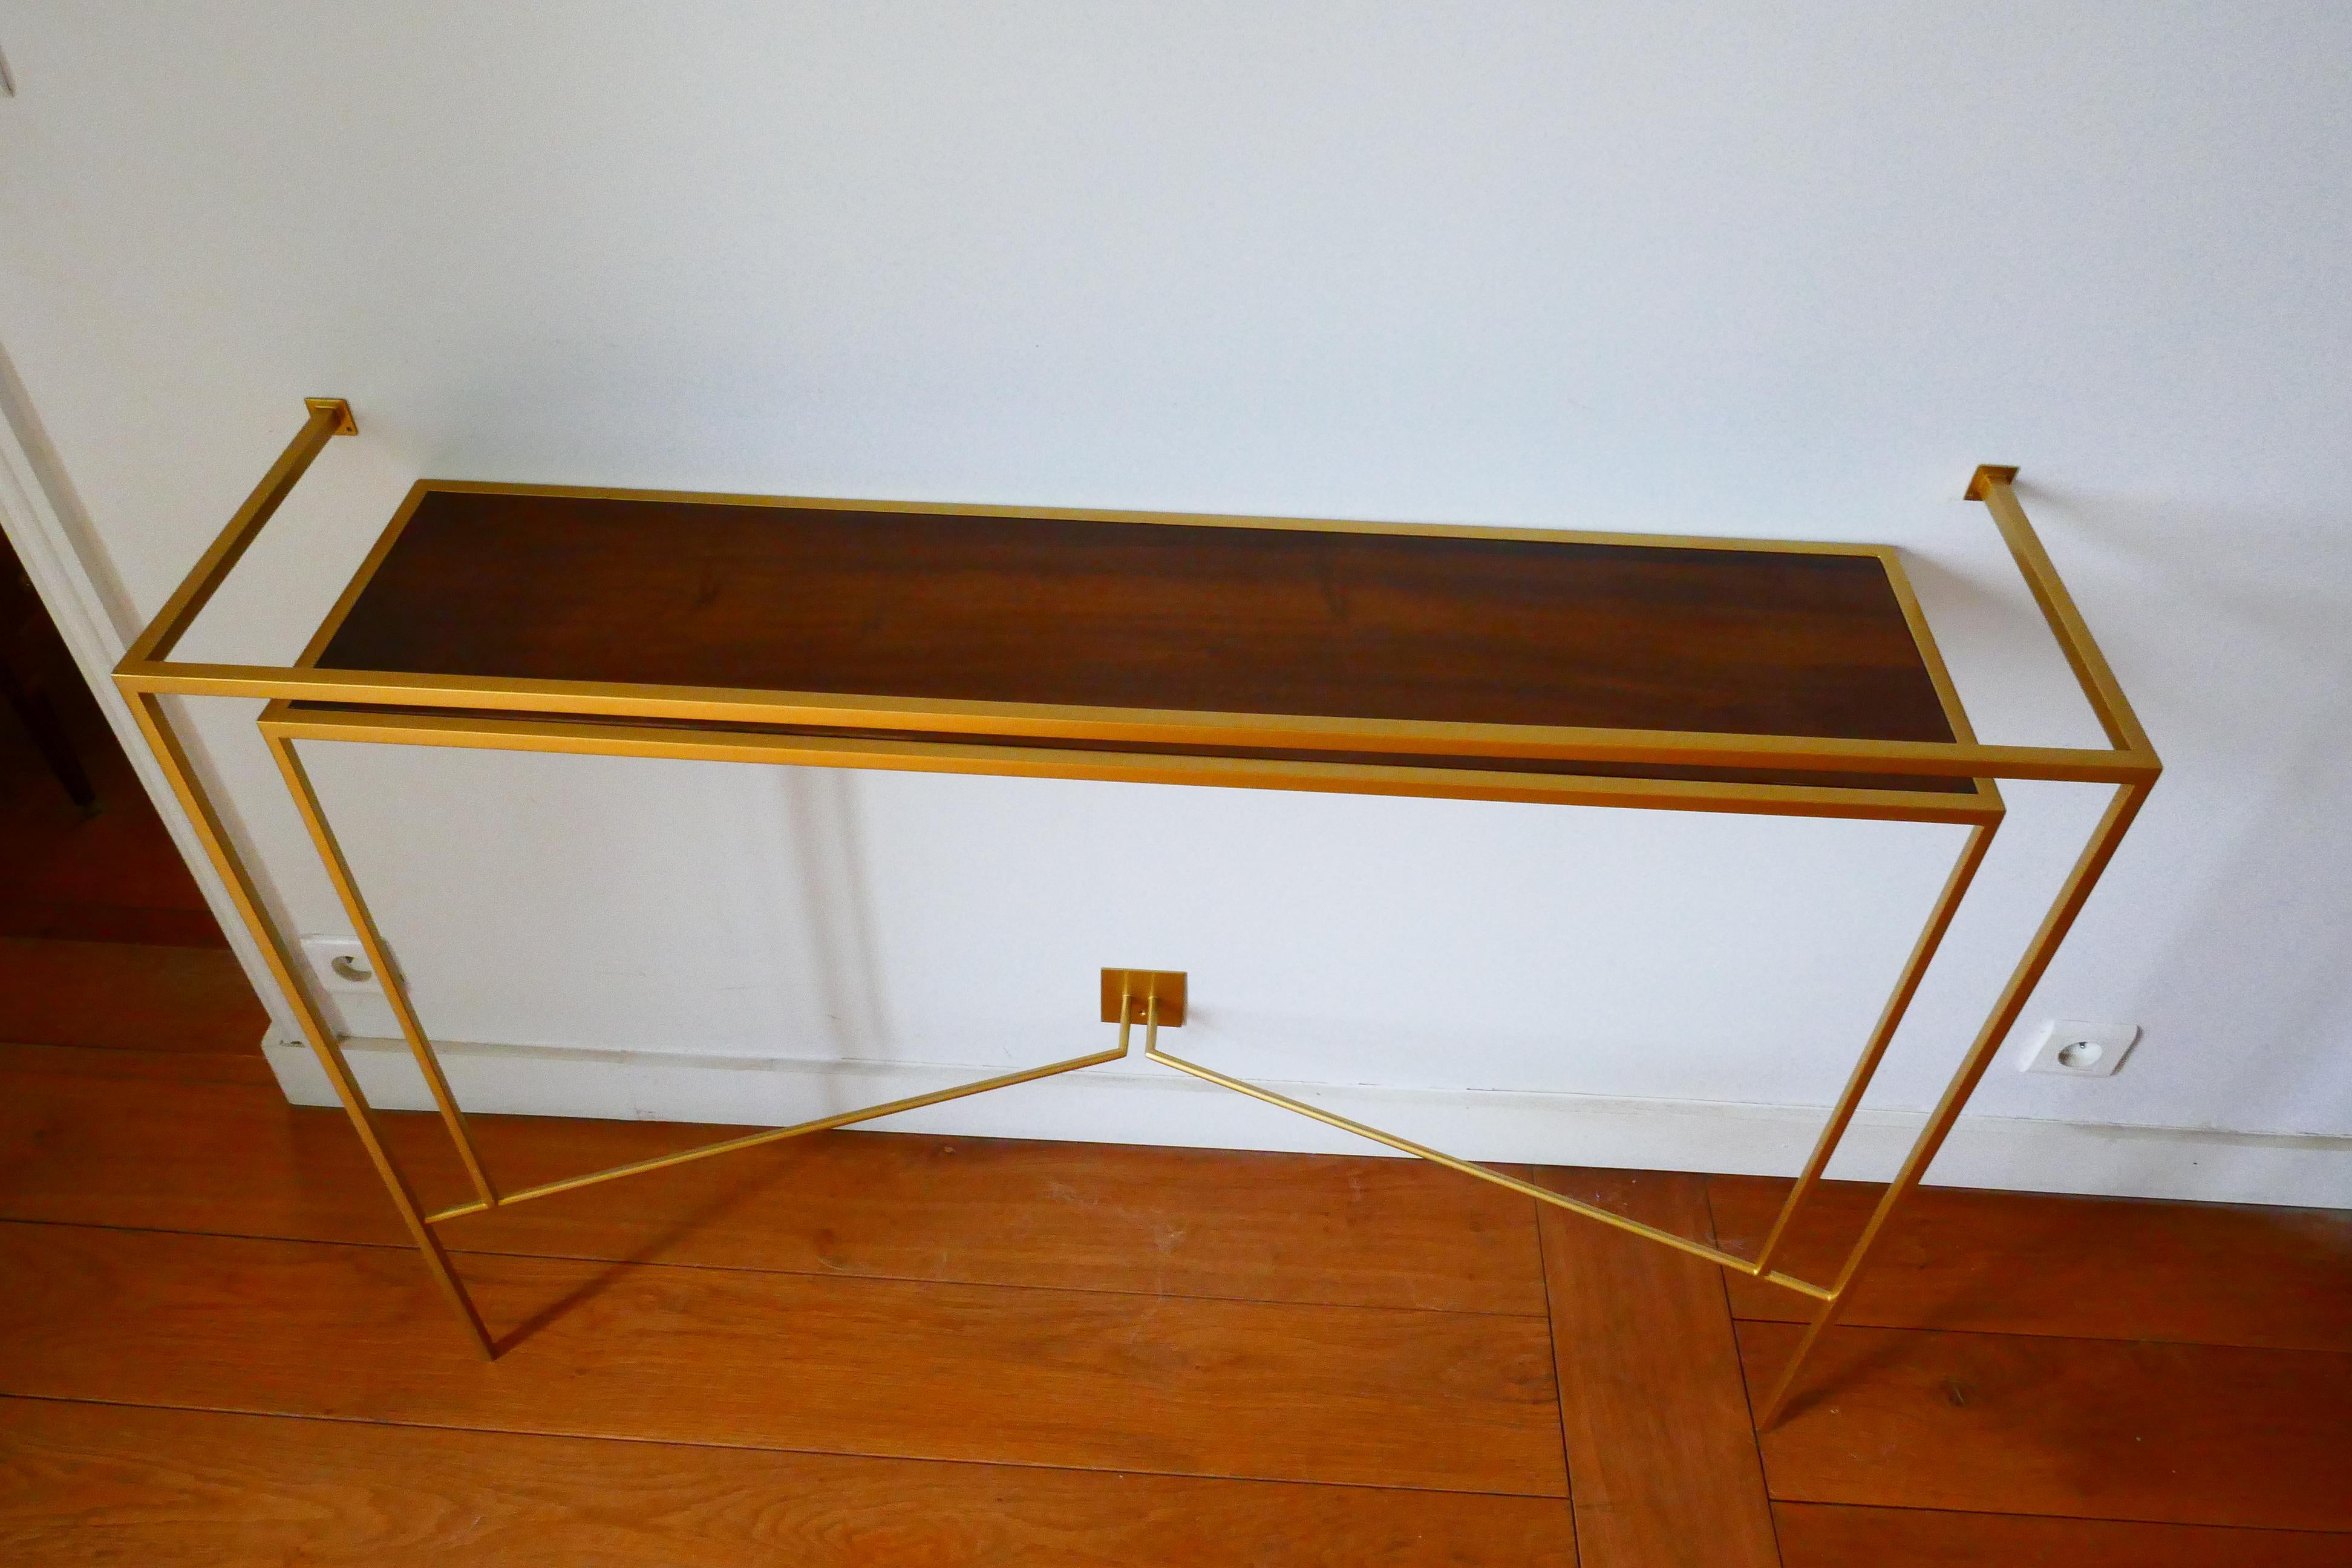 Metal Console in Gold, Bronze Brass Patina with One Walnut Shelve by Aymeric Lefort